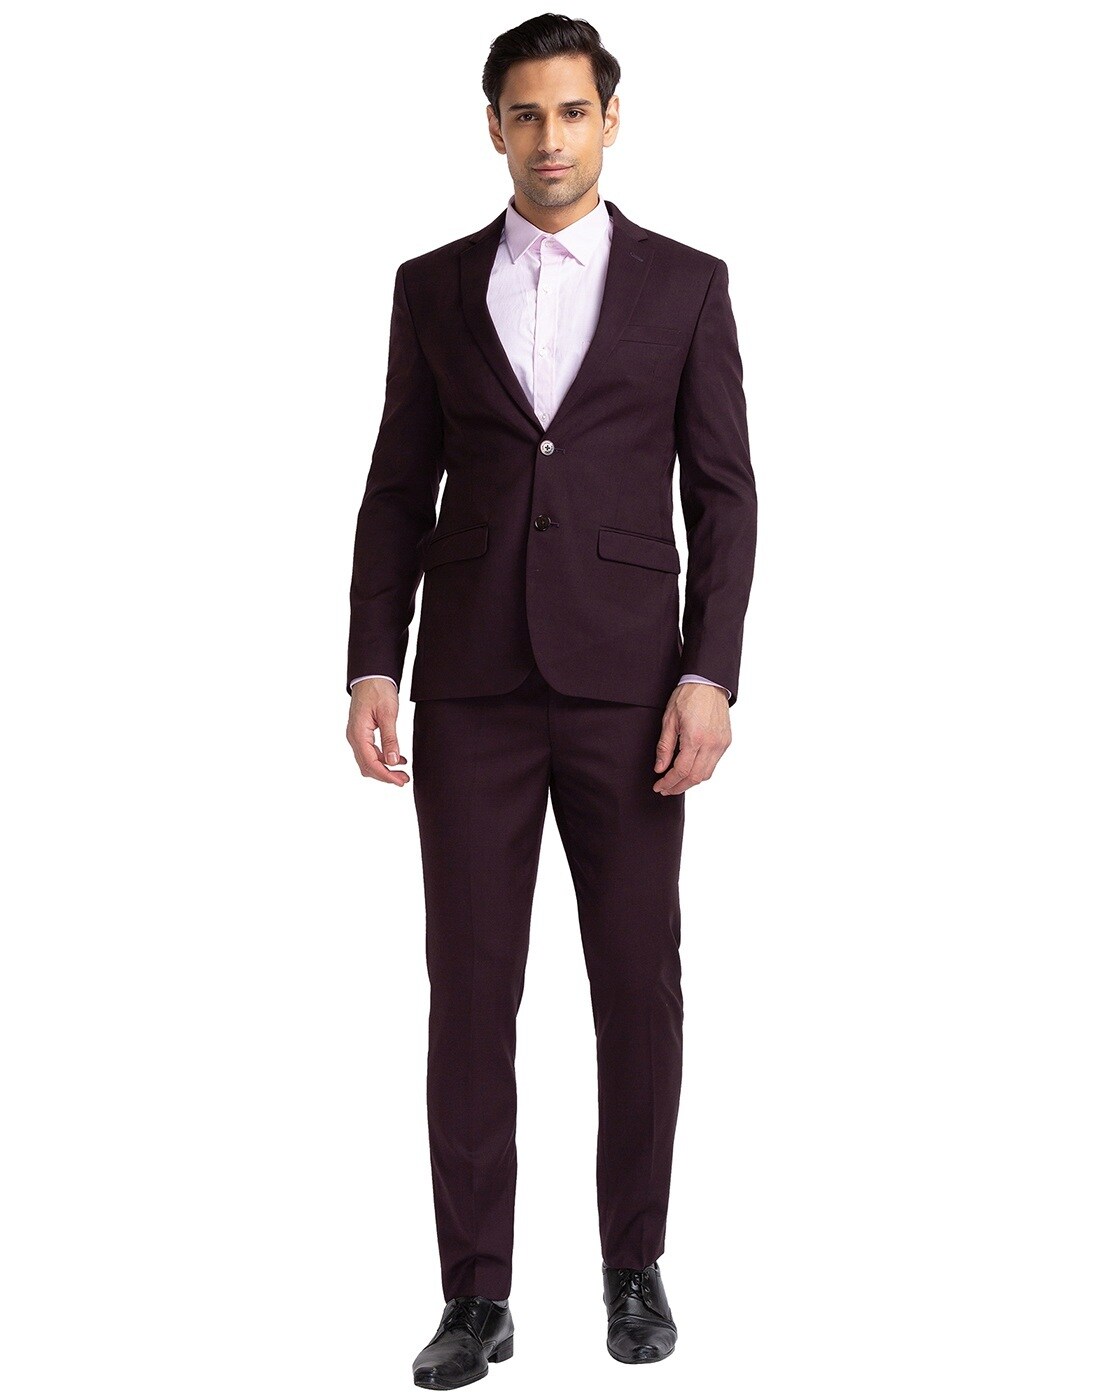 Mens red suit